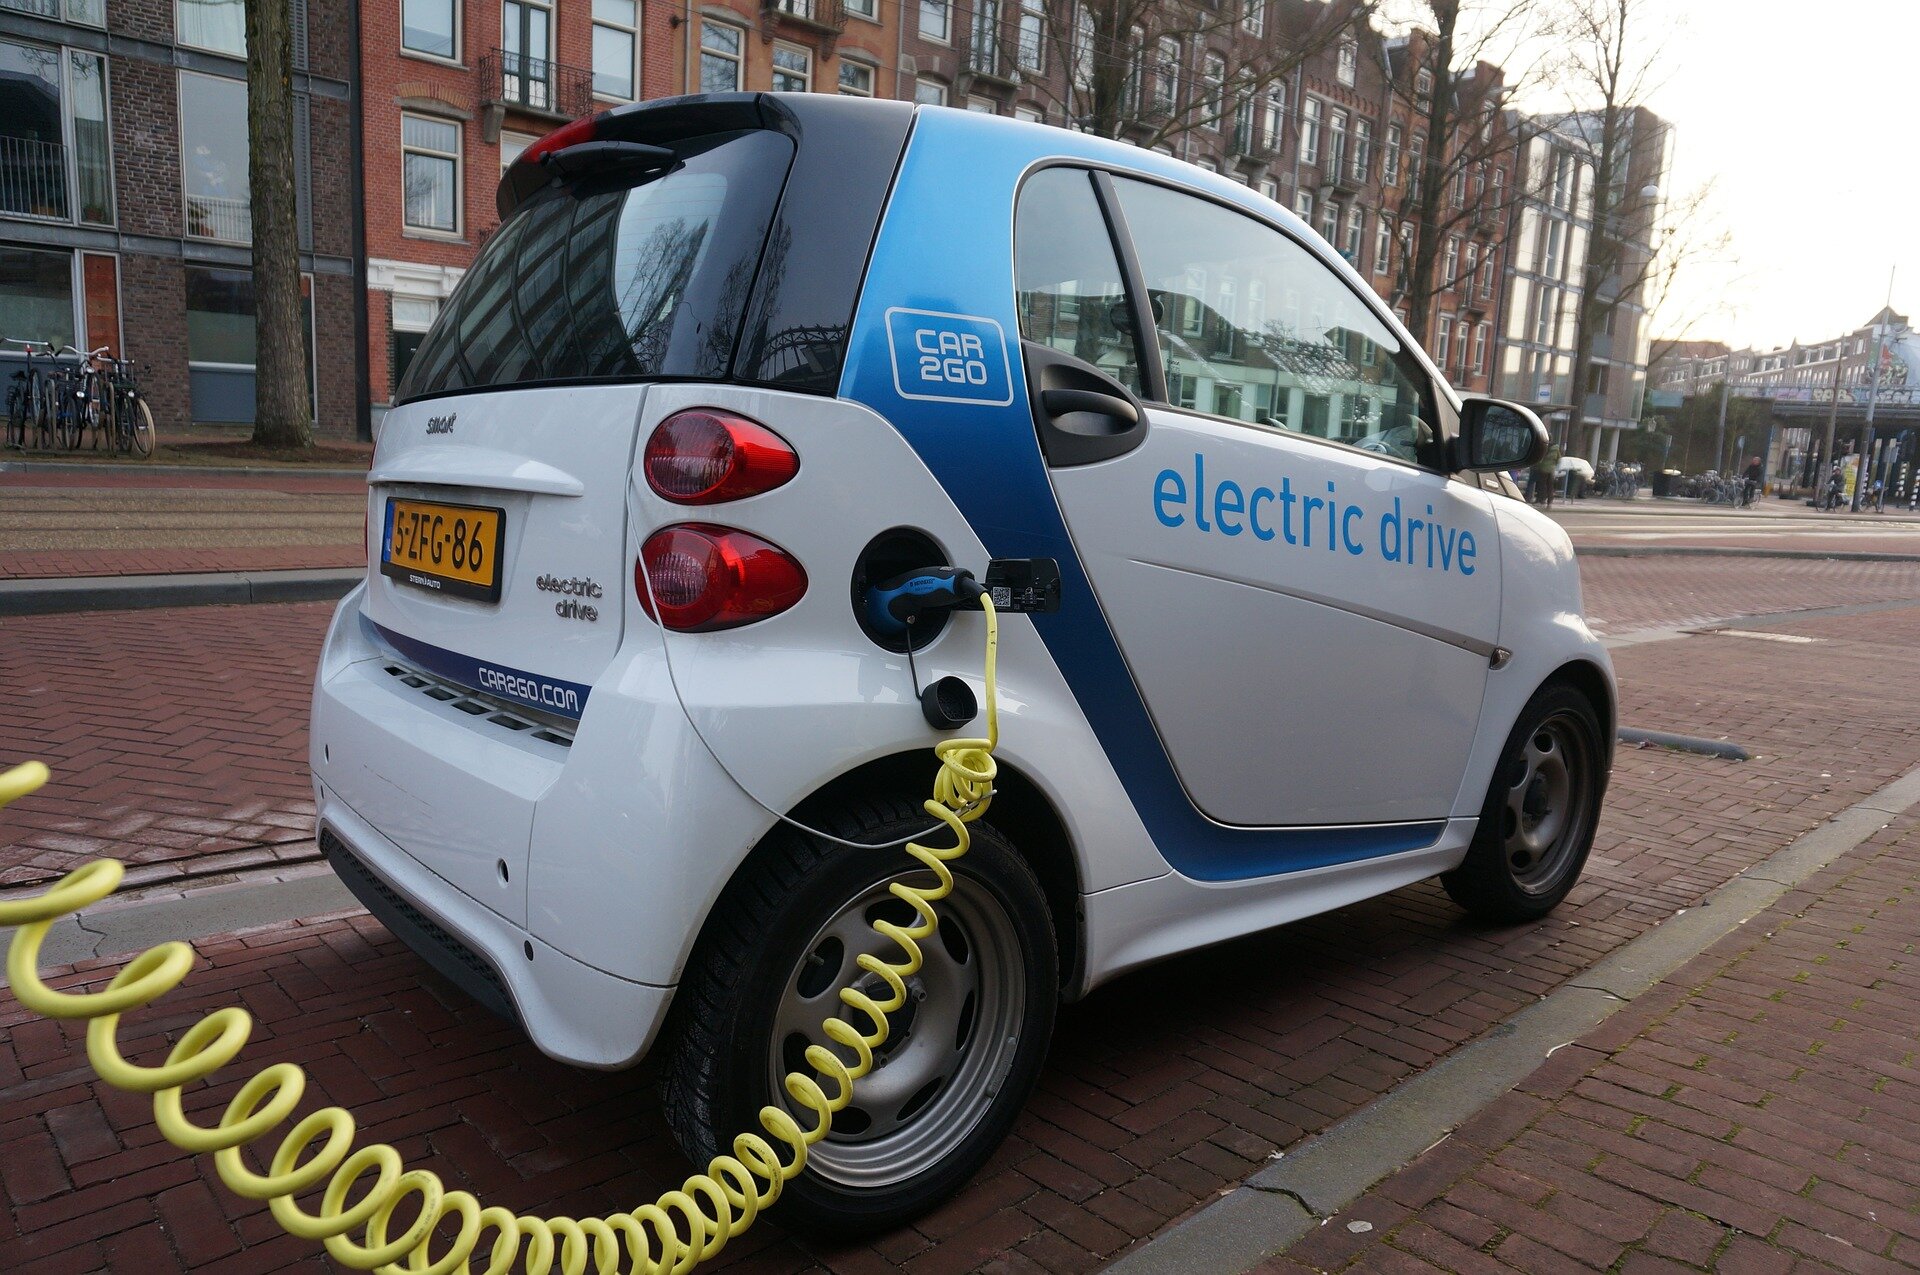 Lowspeed electric vehicles could affect Chinese demand for gasoline